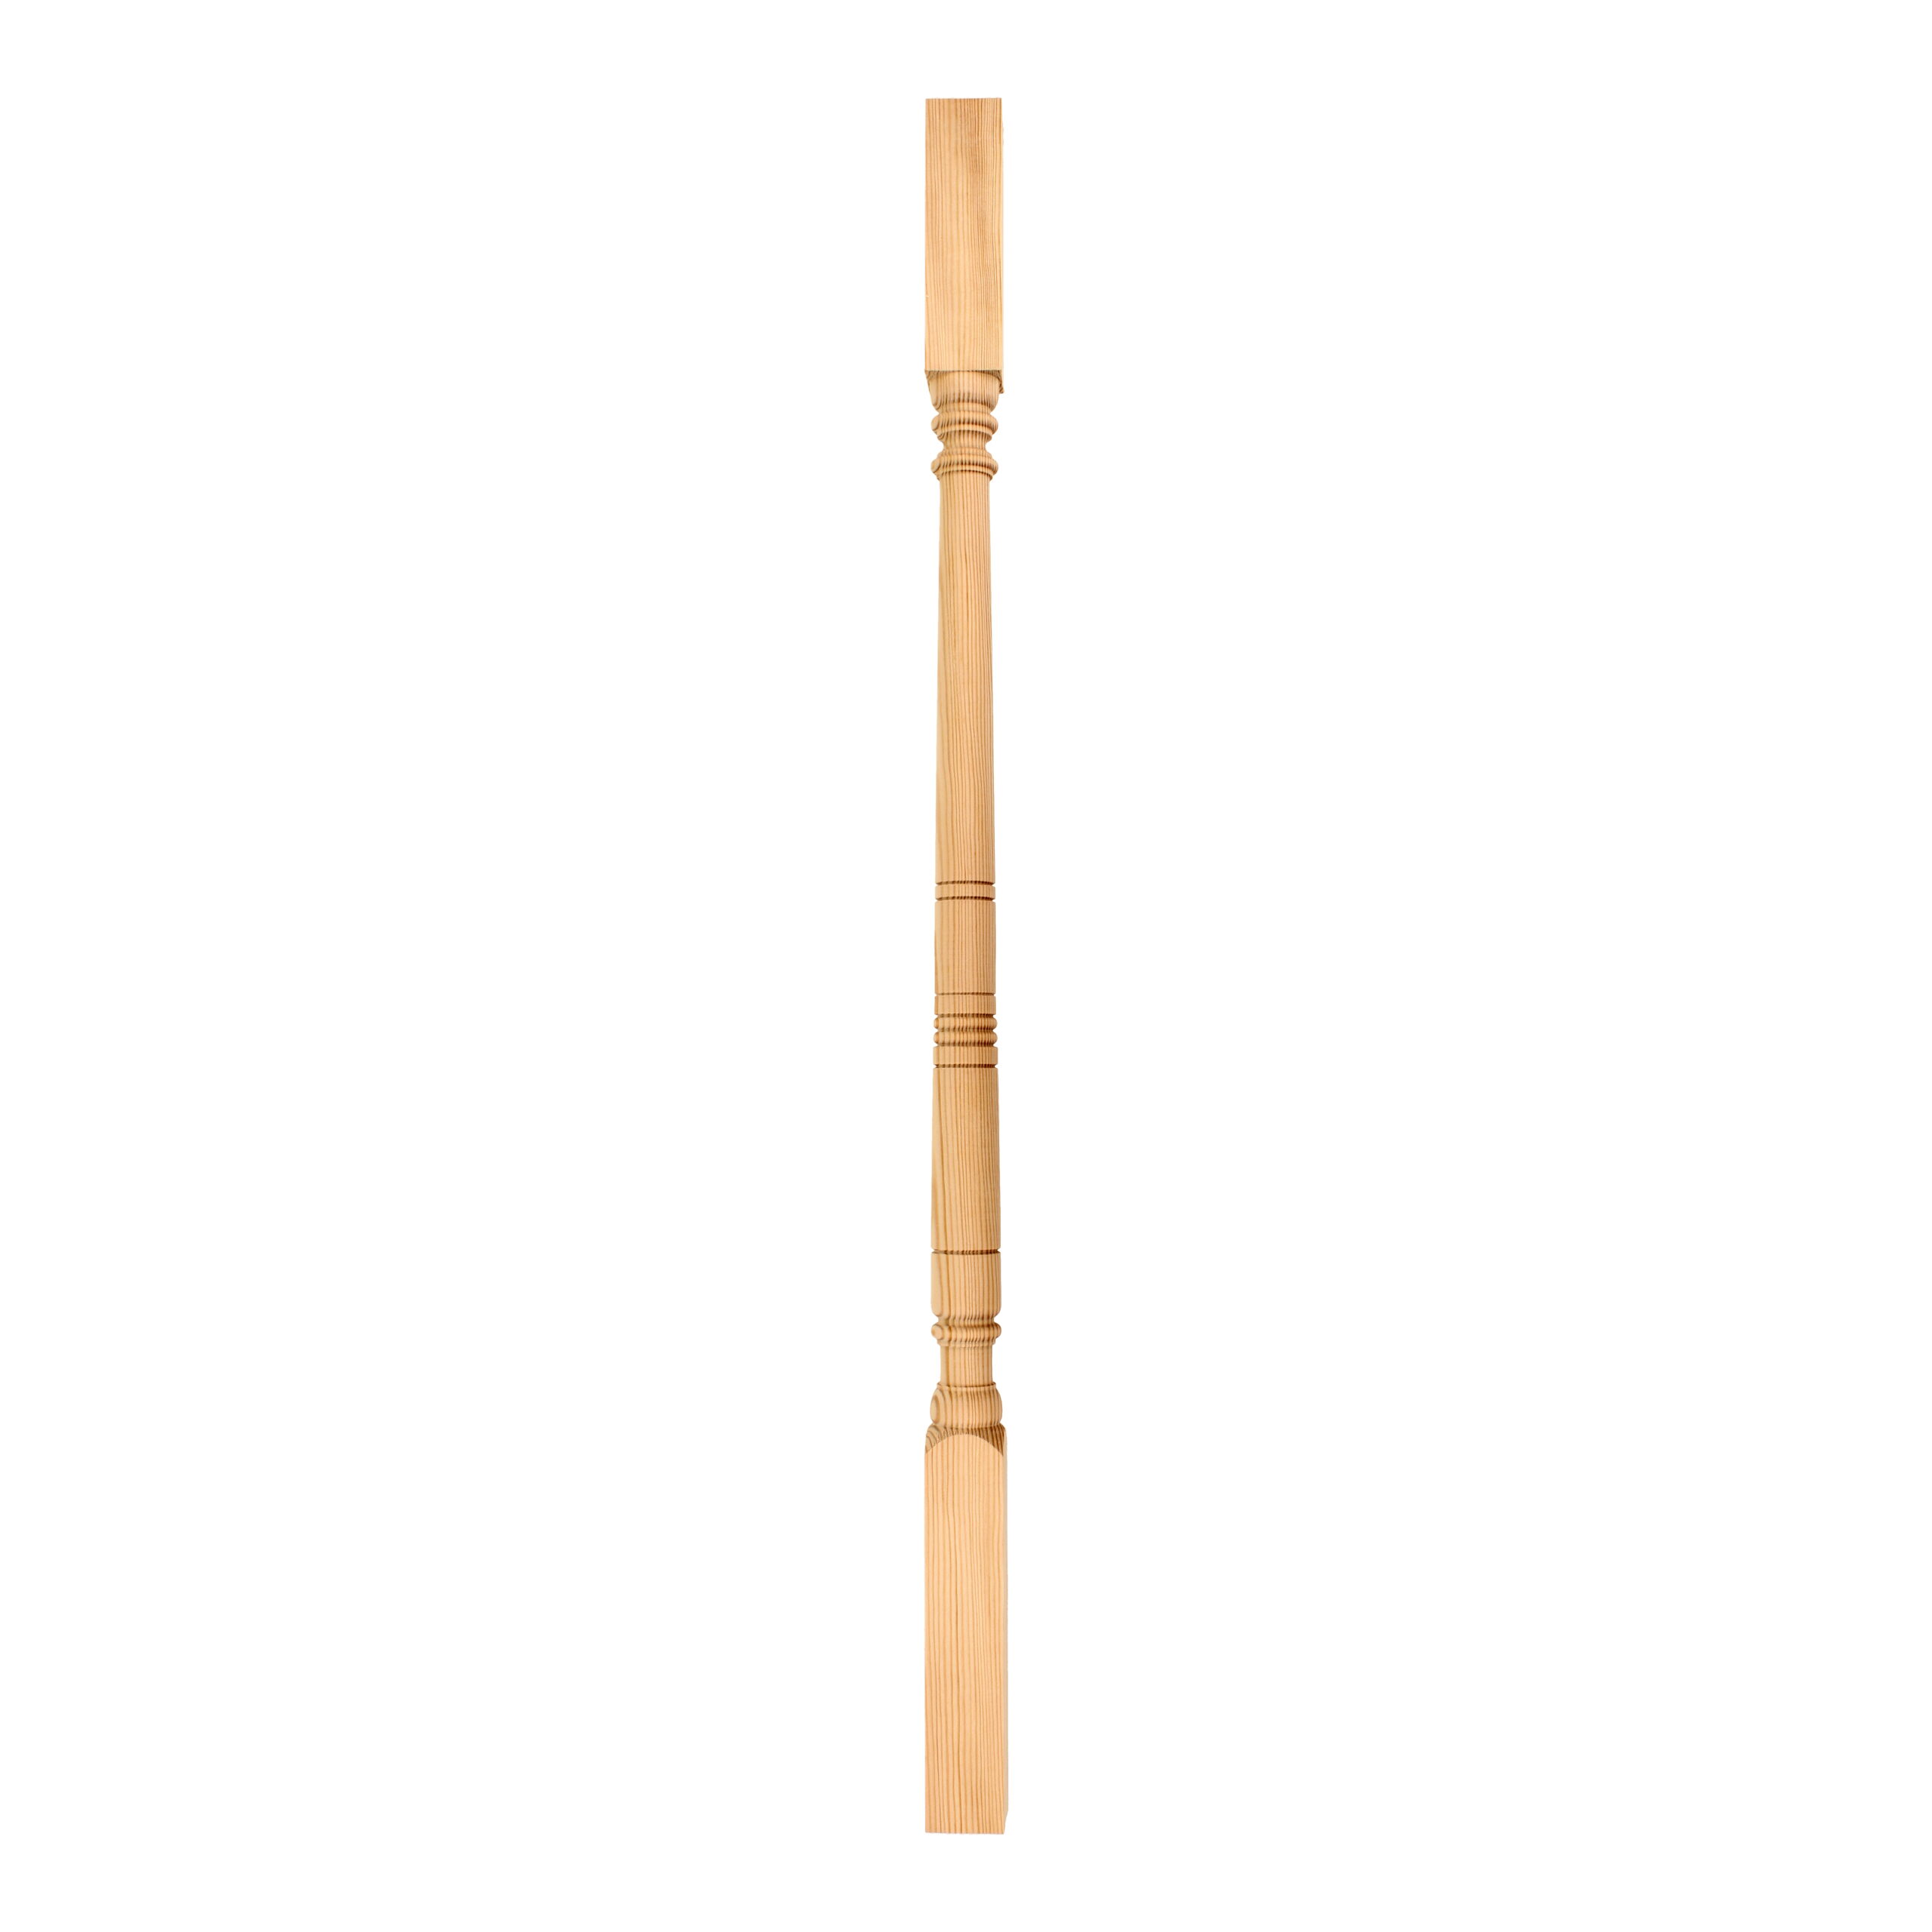 CSIL009 - Wooden staircase spindle.